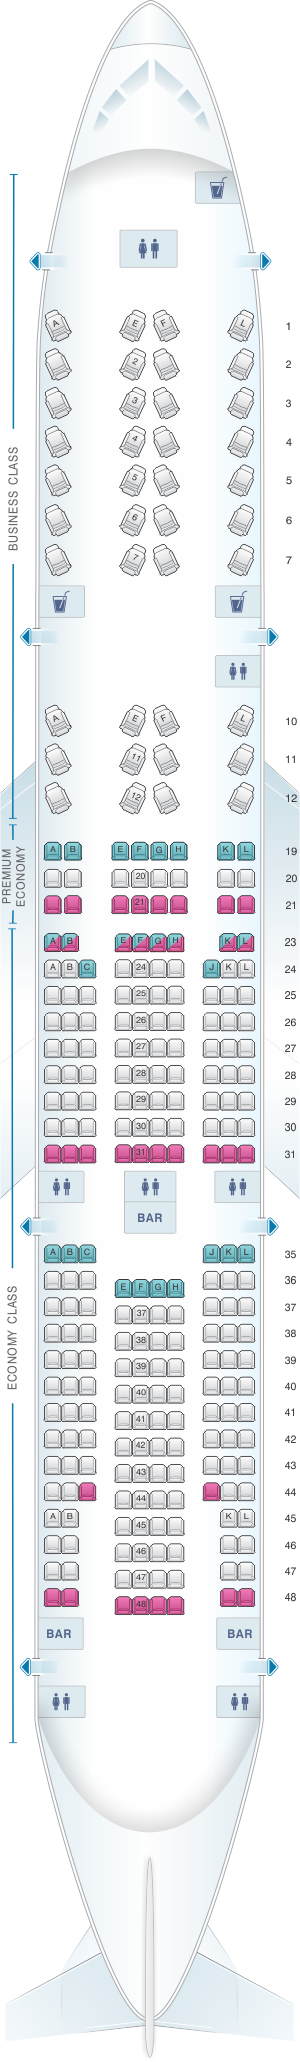 Seat map for Air France Boeing B777 200 International Long-Haul 280pax